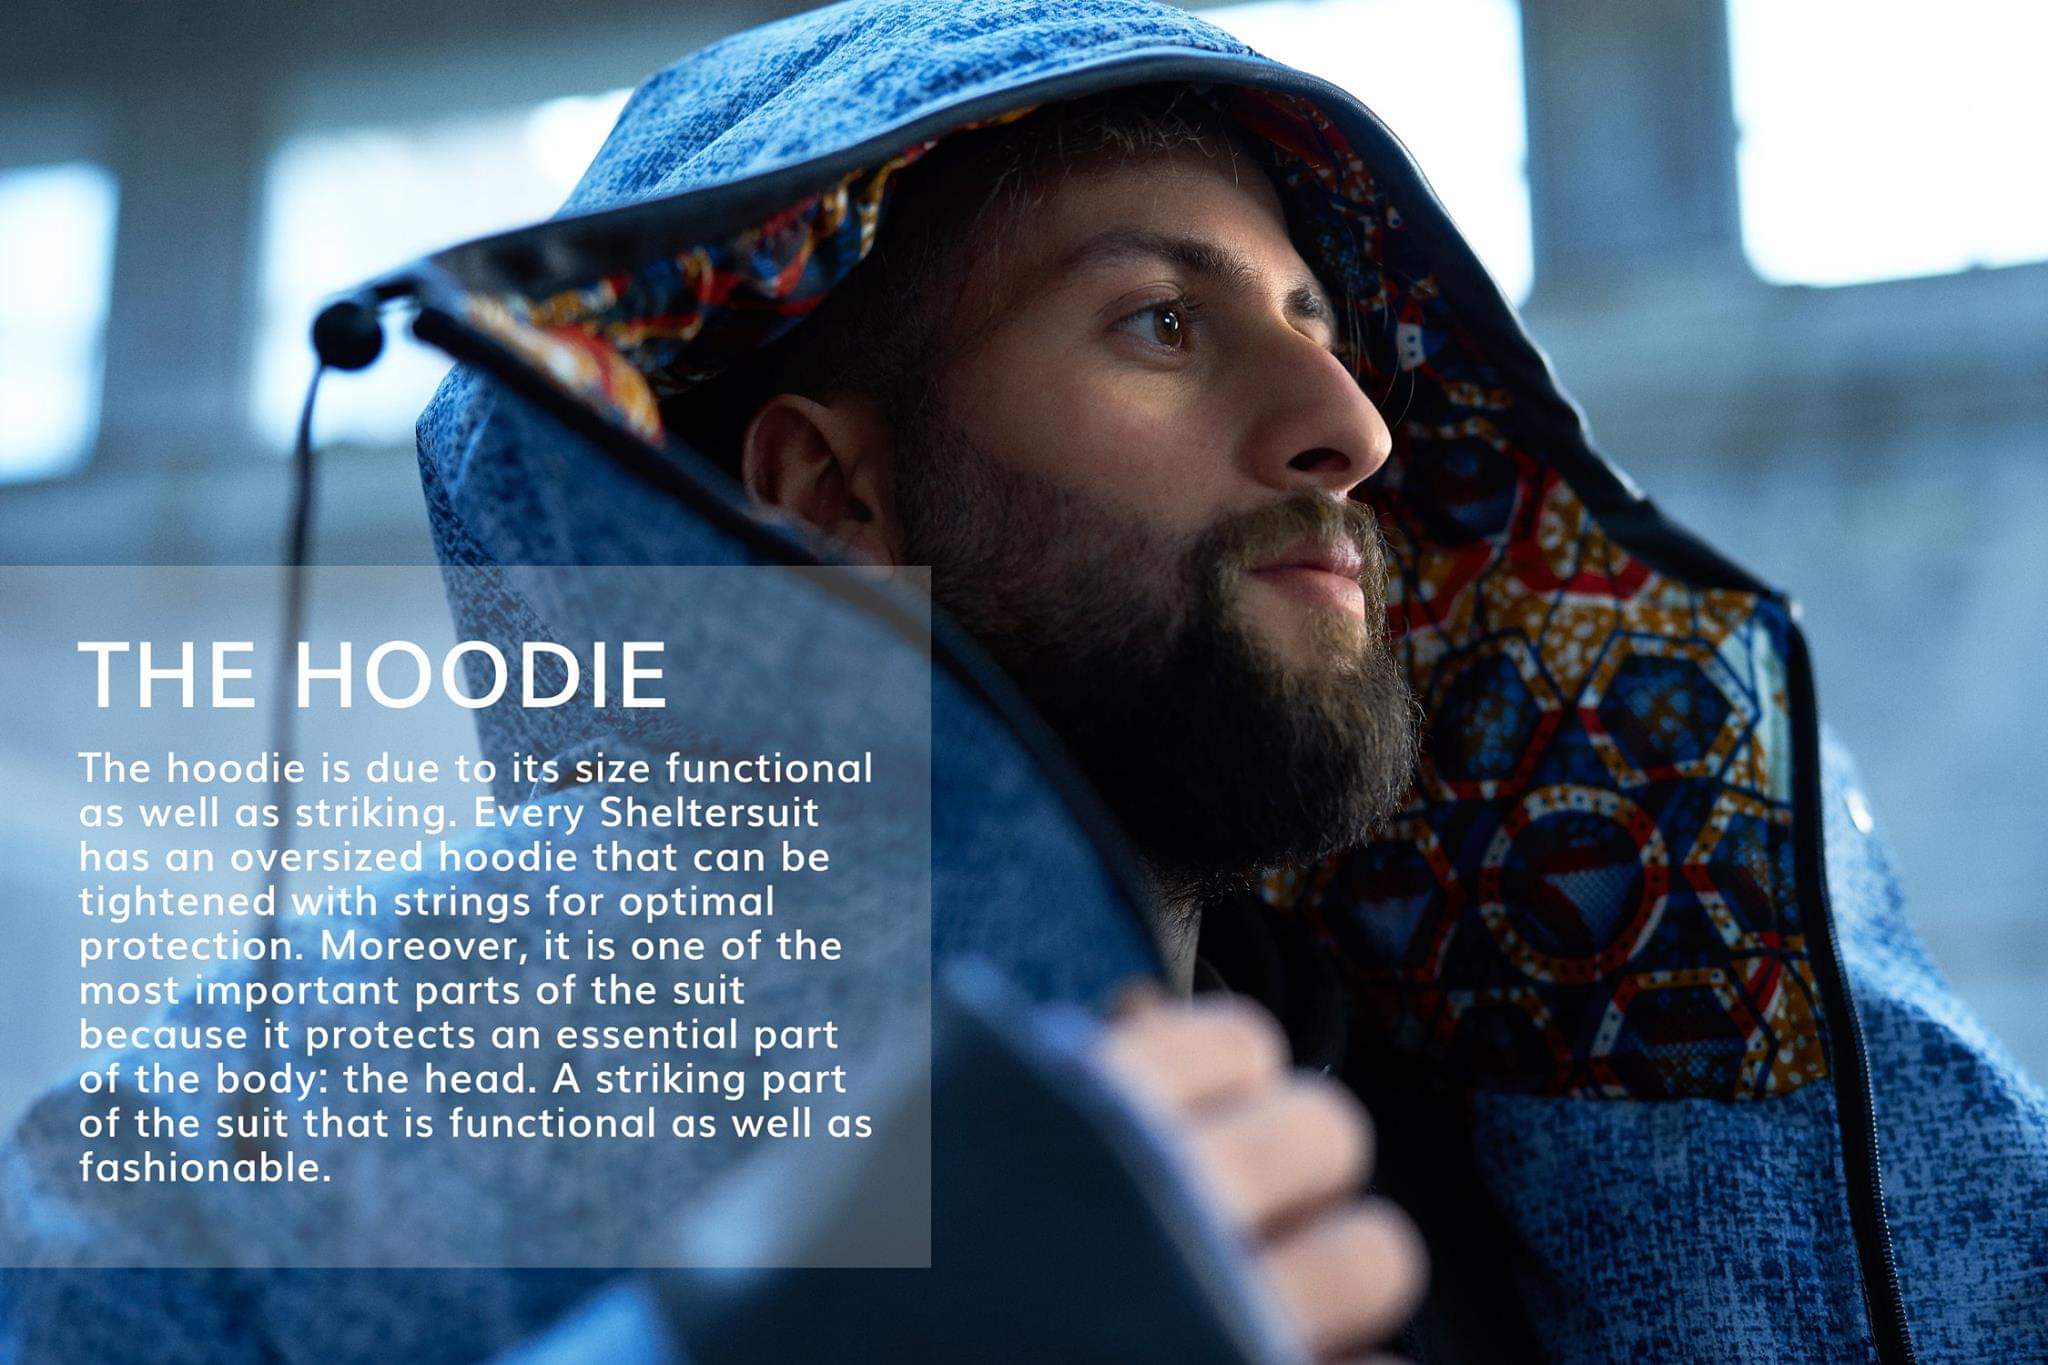 The head can the most exposed part of the body and therefore needs warm and dry protection. The oversized hoodie is designed to provide warmth and keeps this vital body part dry in the worst conditions.